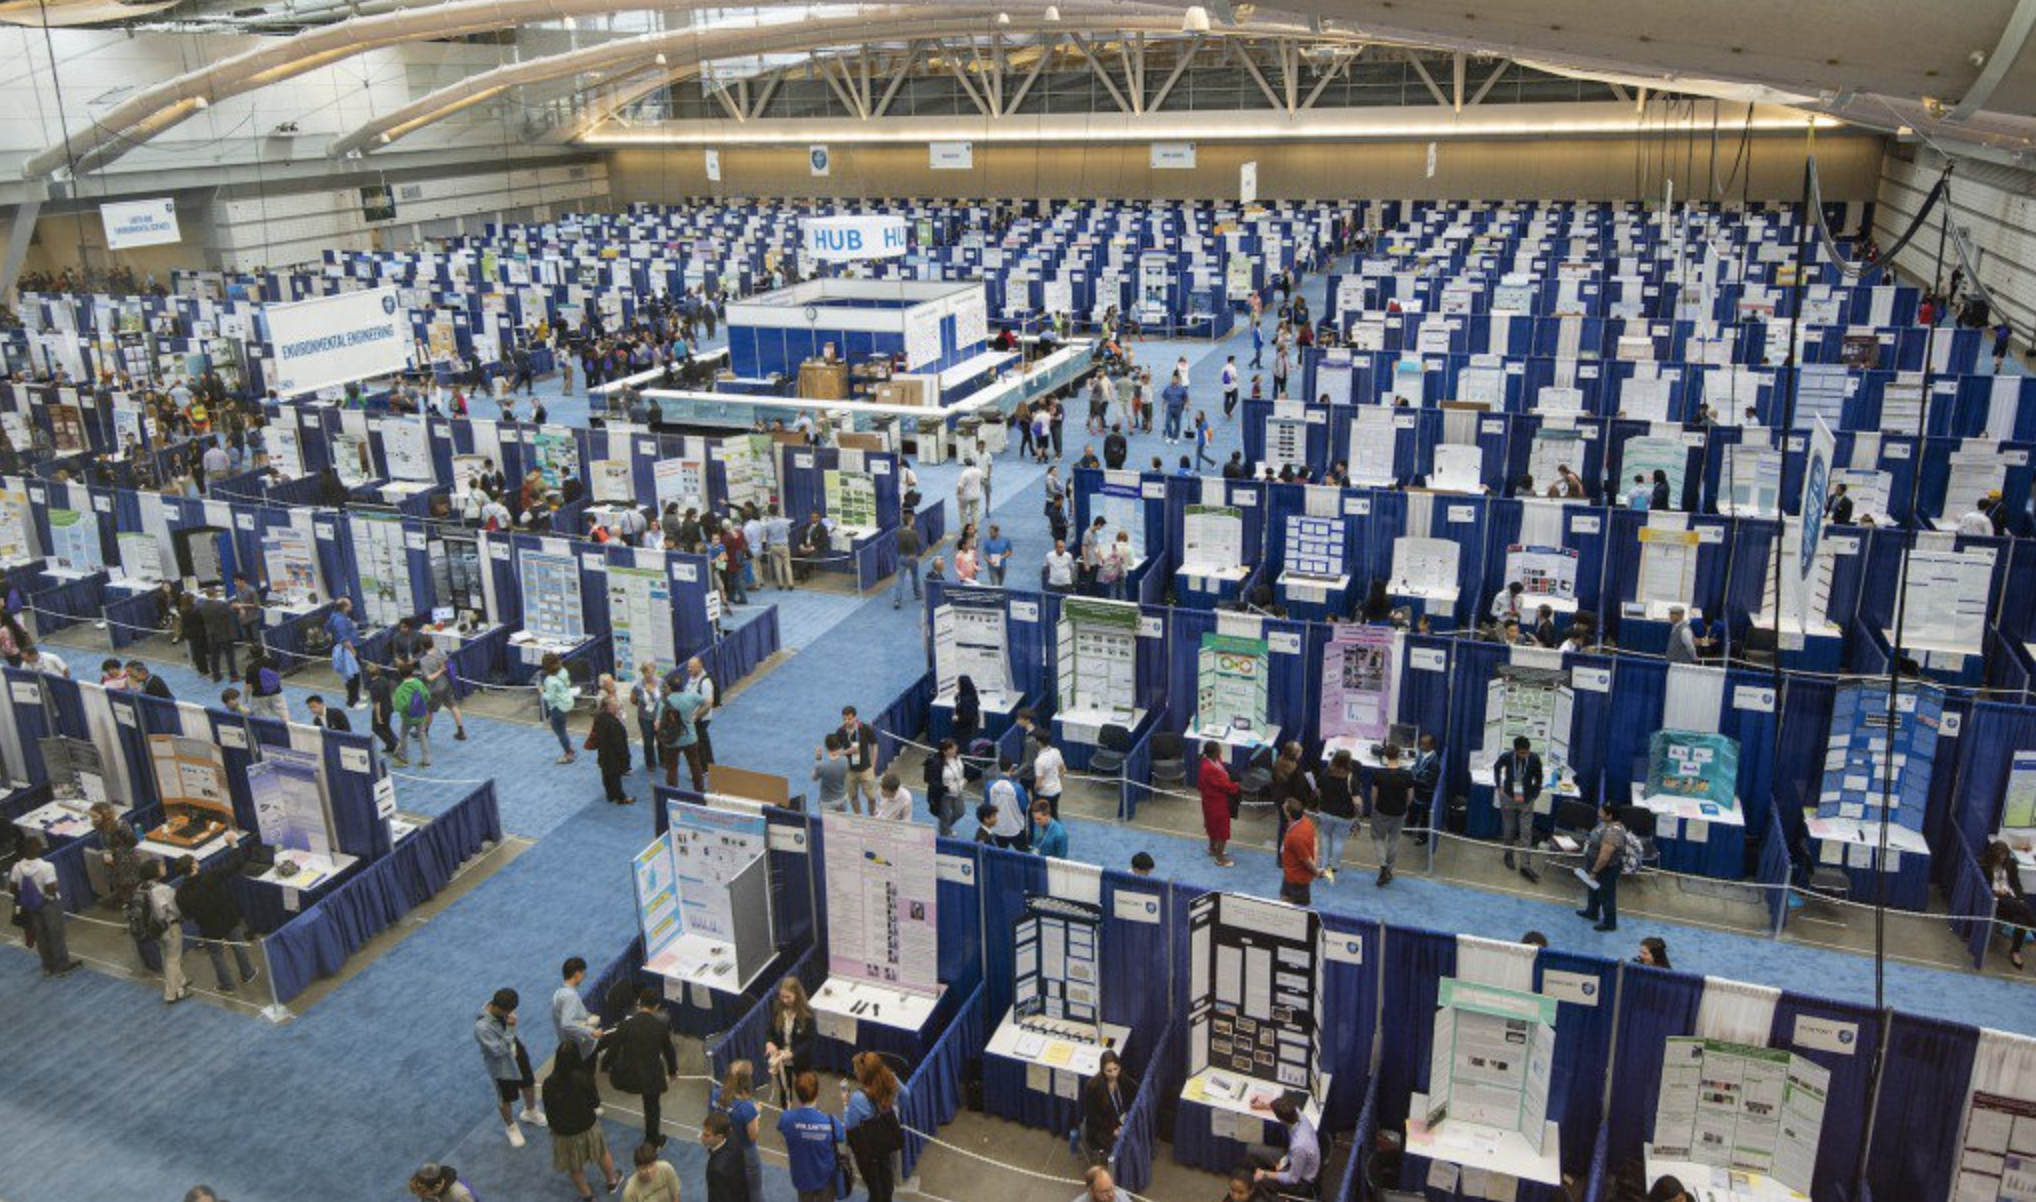 REVIEW: “Science Fair” represents more than just stereotypes